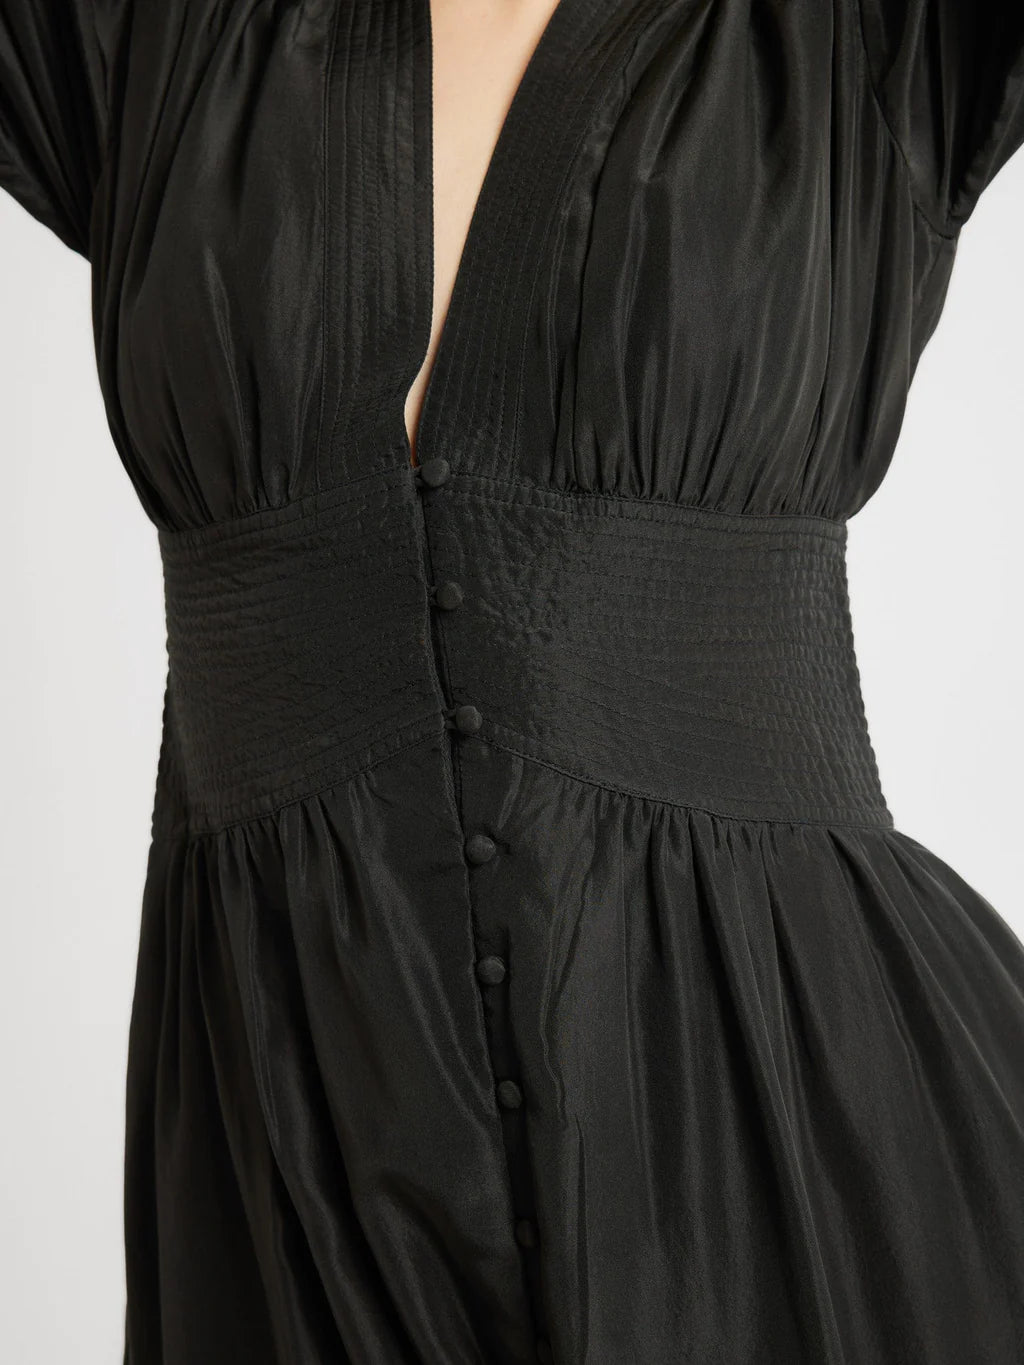 Mille – Anya Dress in Black Washed Silk